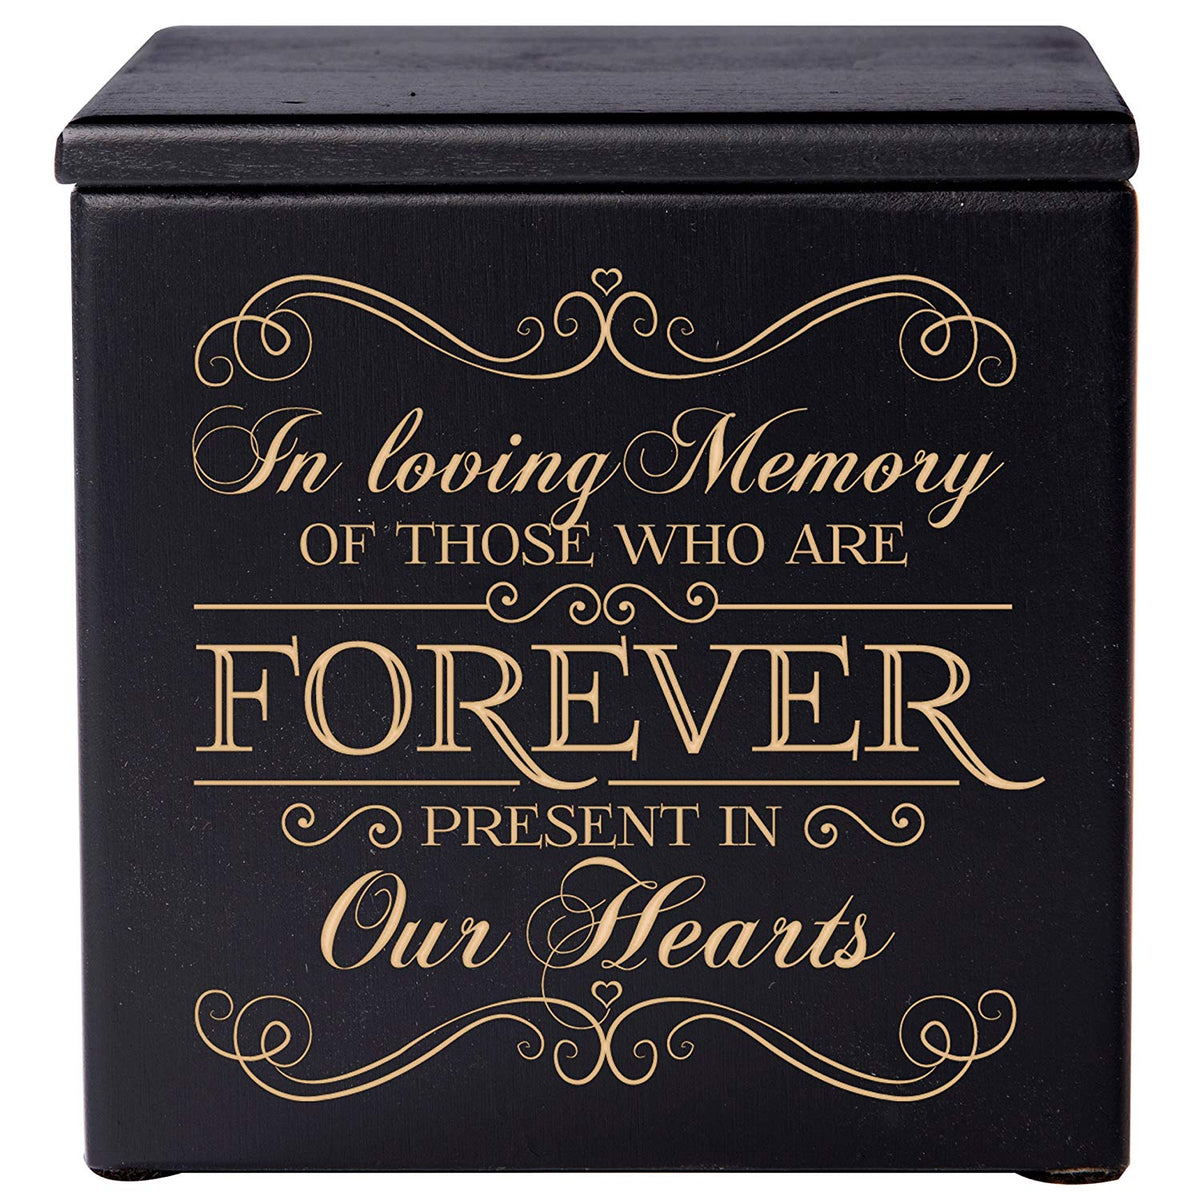 Memorial Wooden Cremation Urn Box of Human Ashes - In Loving Memory - LifeSong Milestones